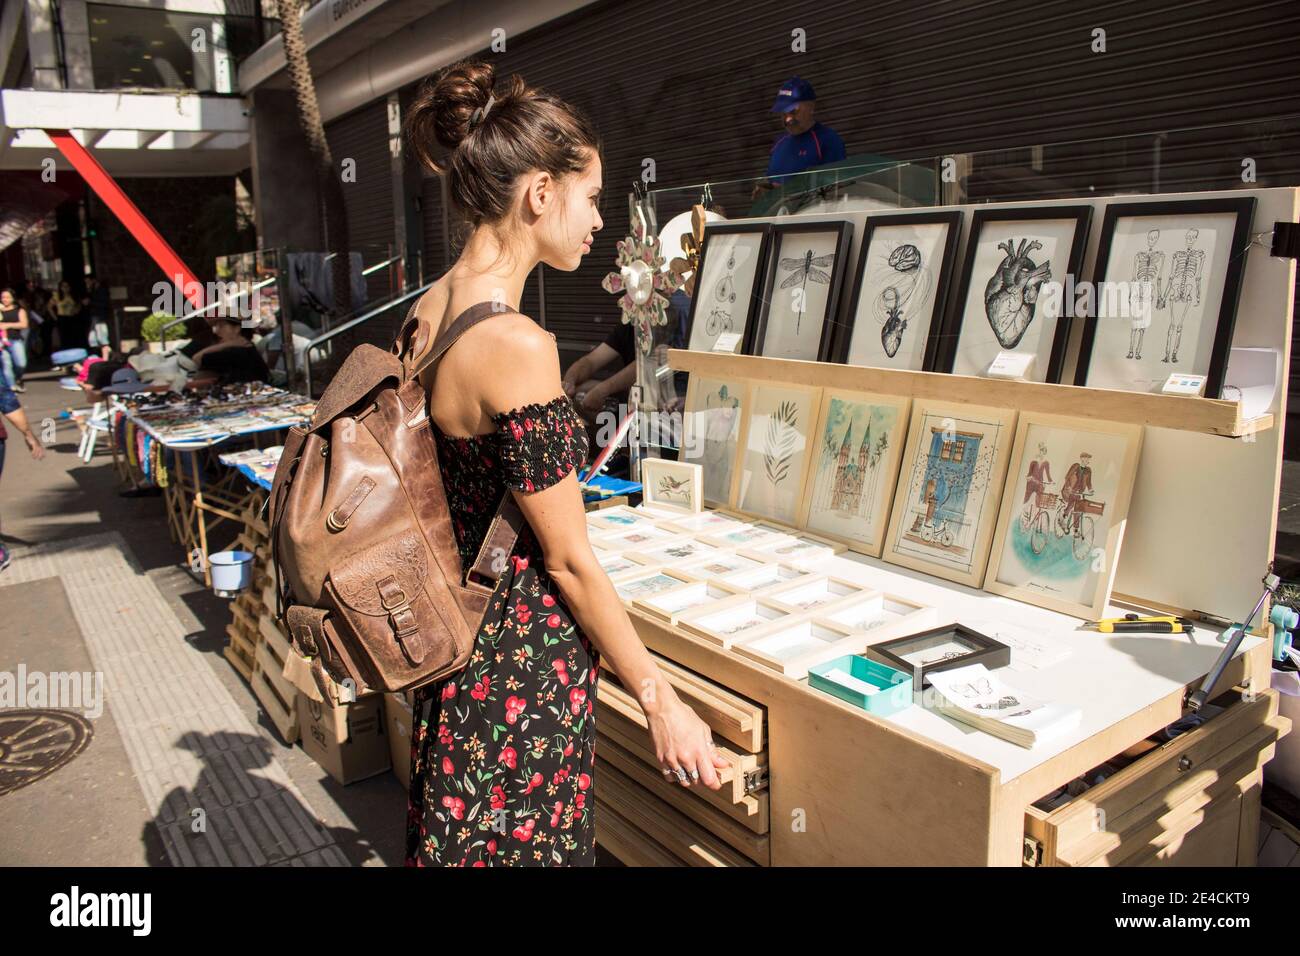 São Paulo / São Paulo / Brazil - 08 19 2018: Pretty young lovely model woman choosing a drawing or a painting to buy at a market place. Stock Photo